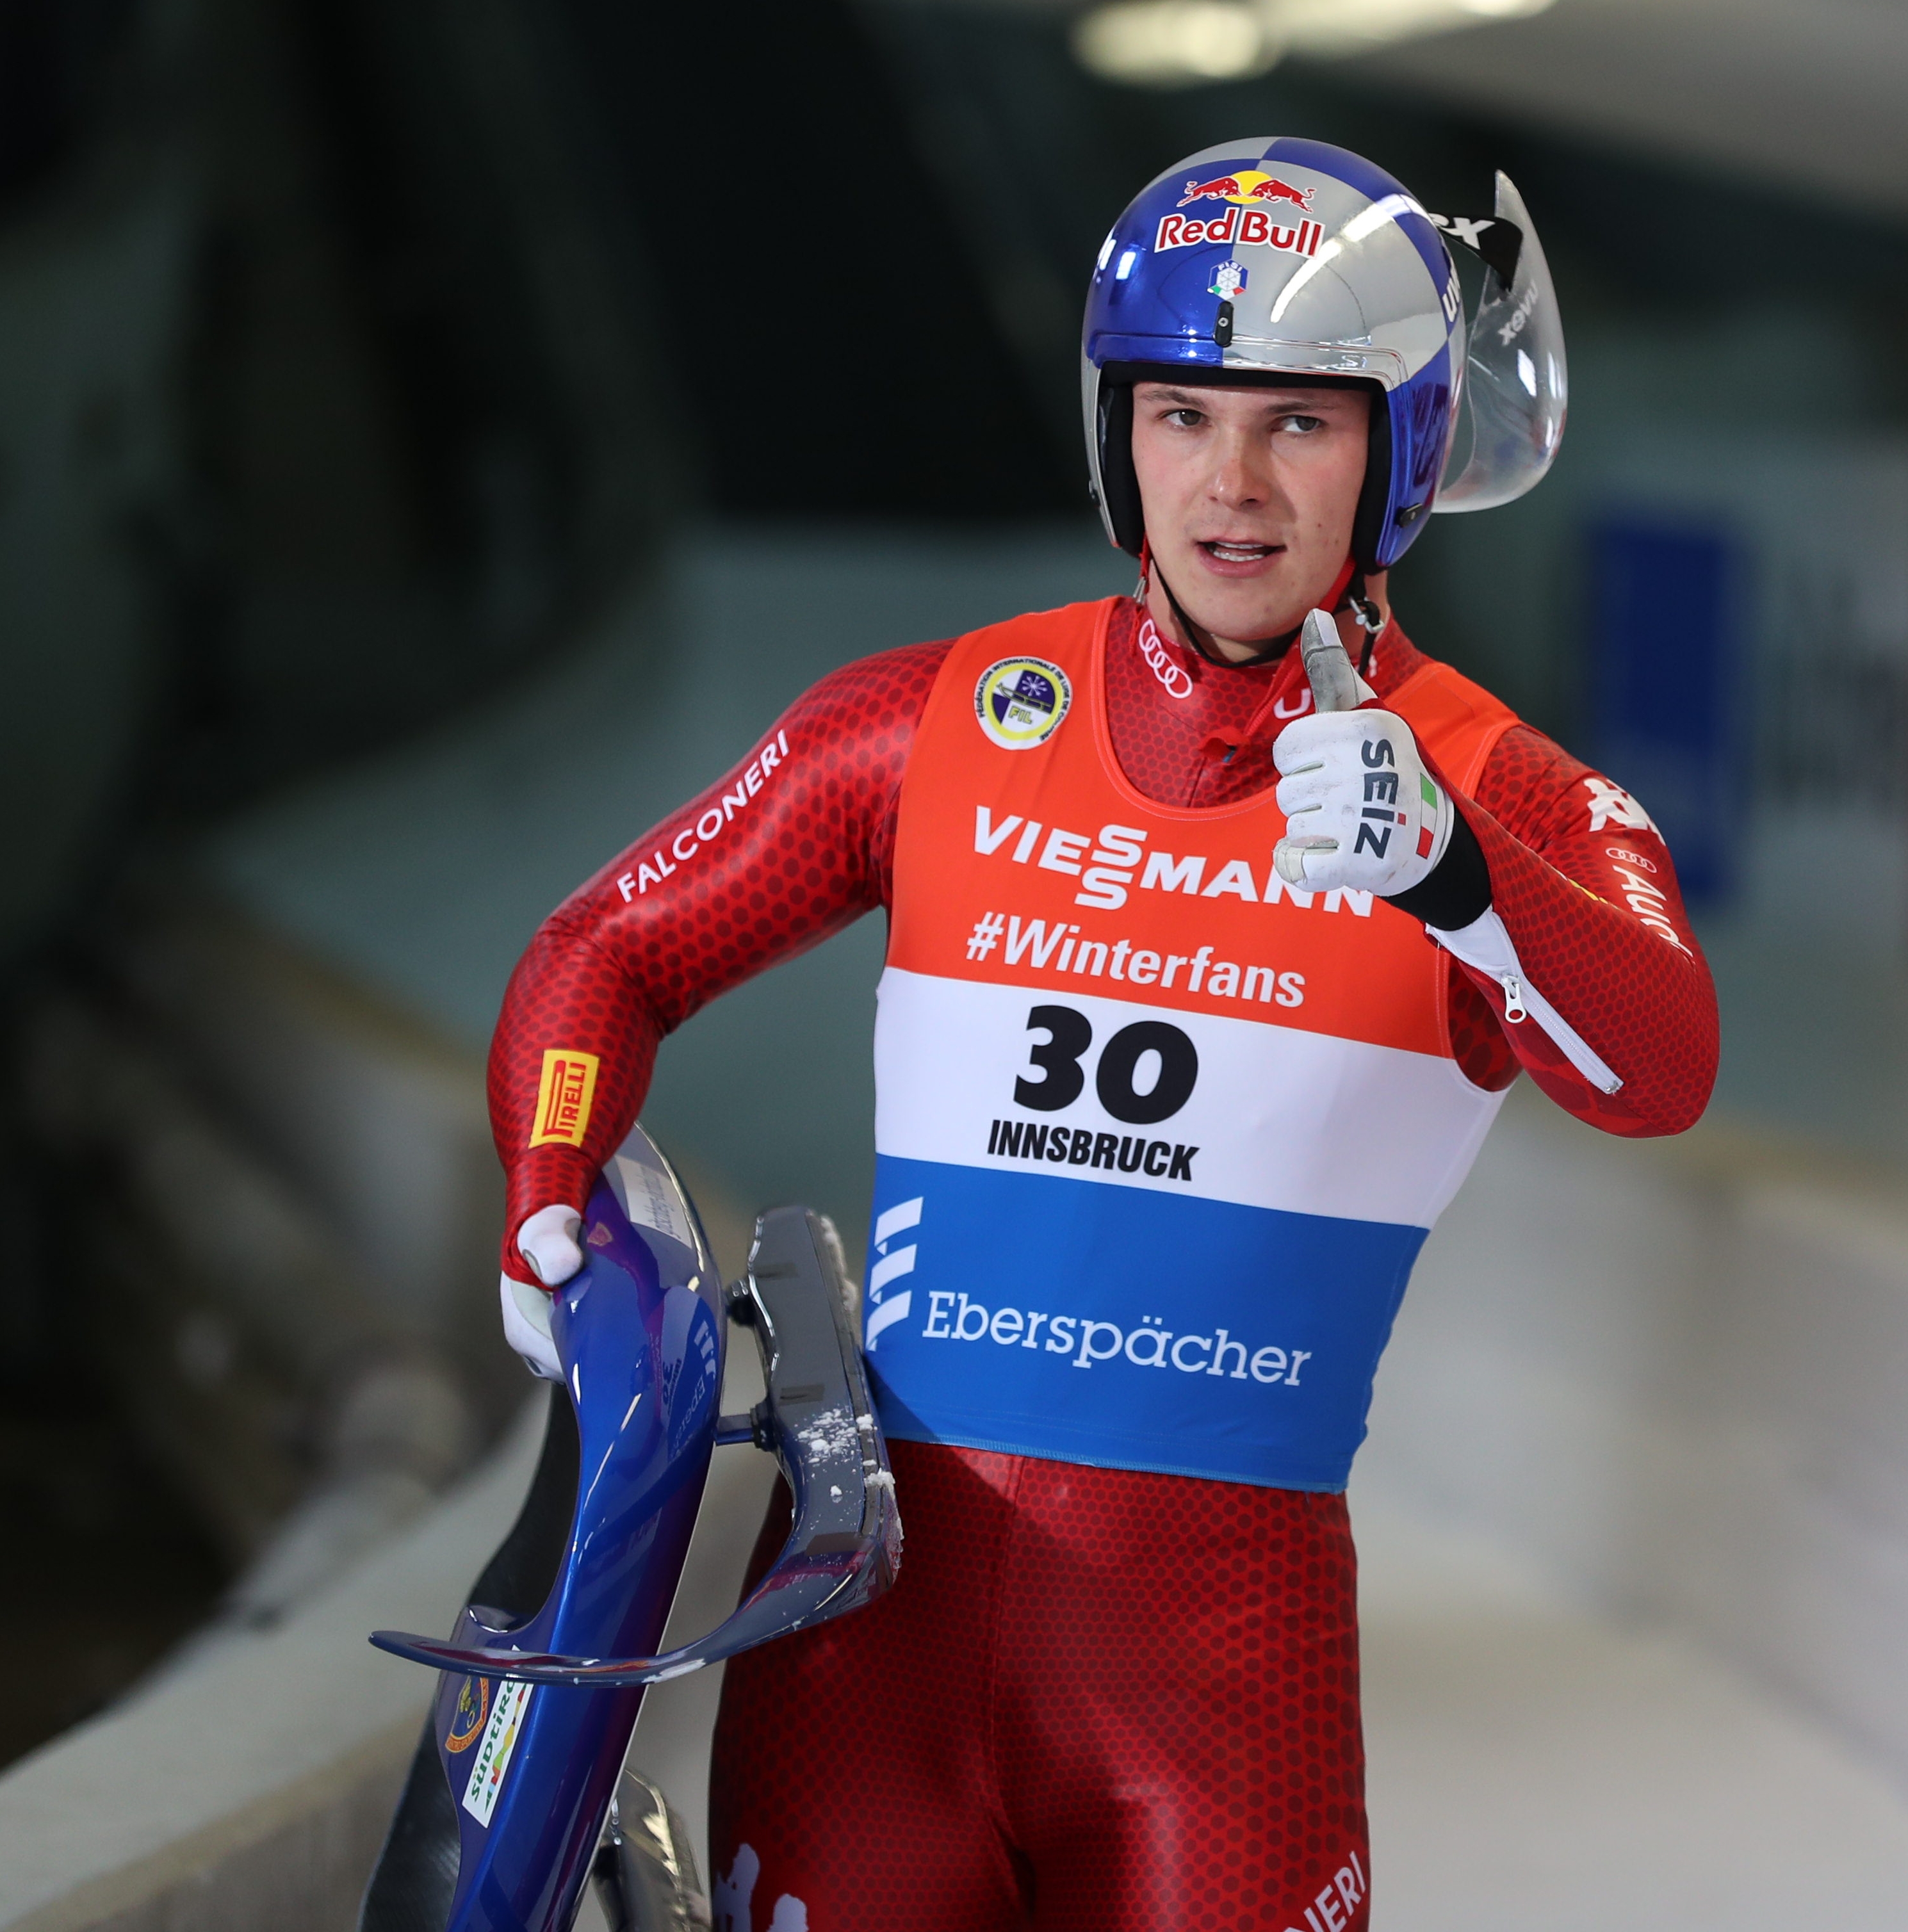 2018-11-25 Men's World Cup at 2018-19 Luge World Cup in Igls by Sandro Halank–749